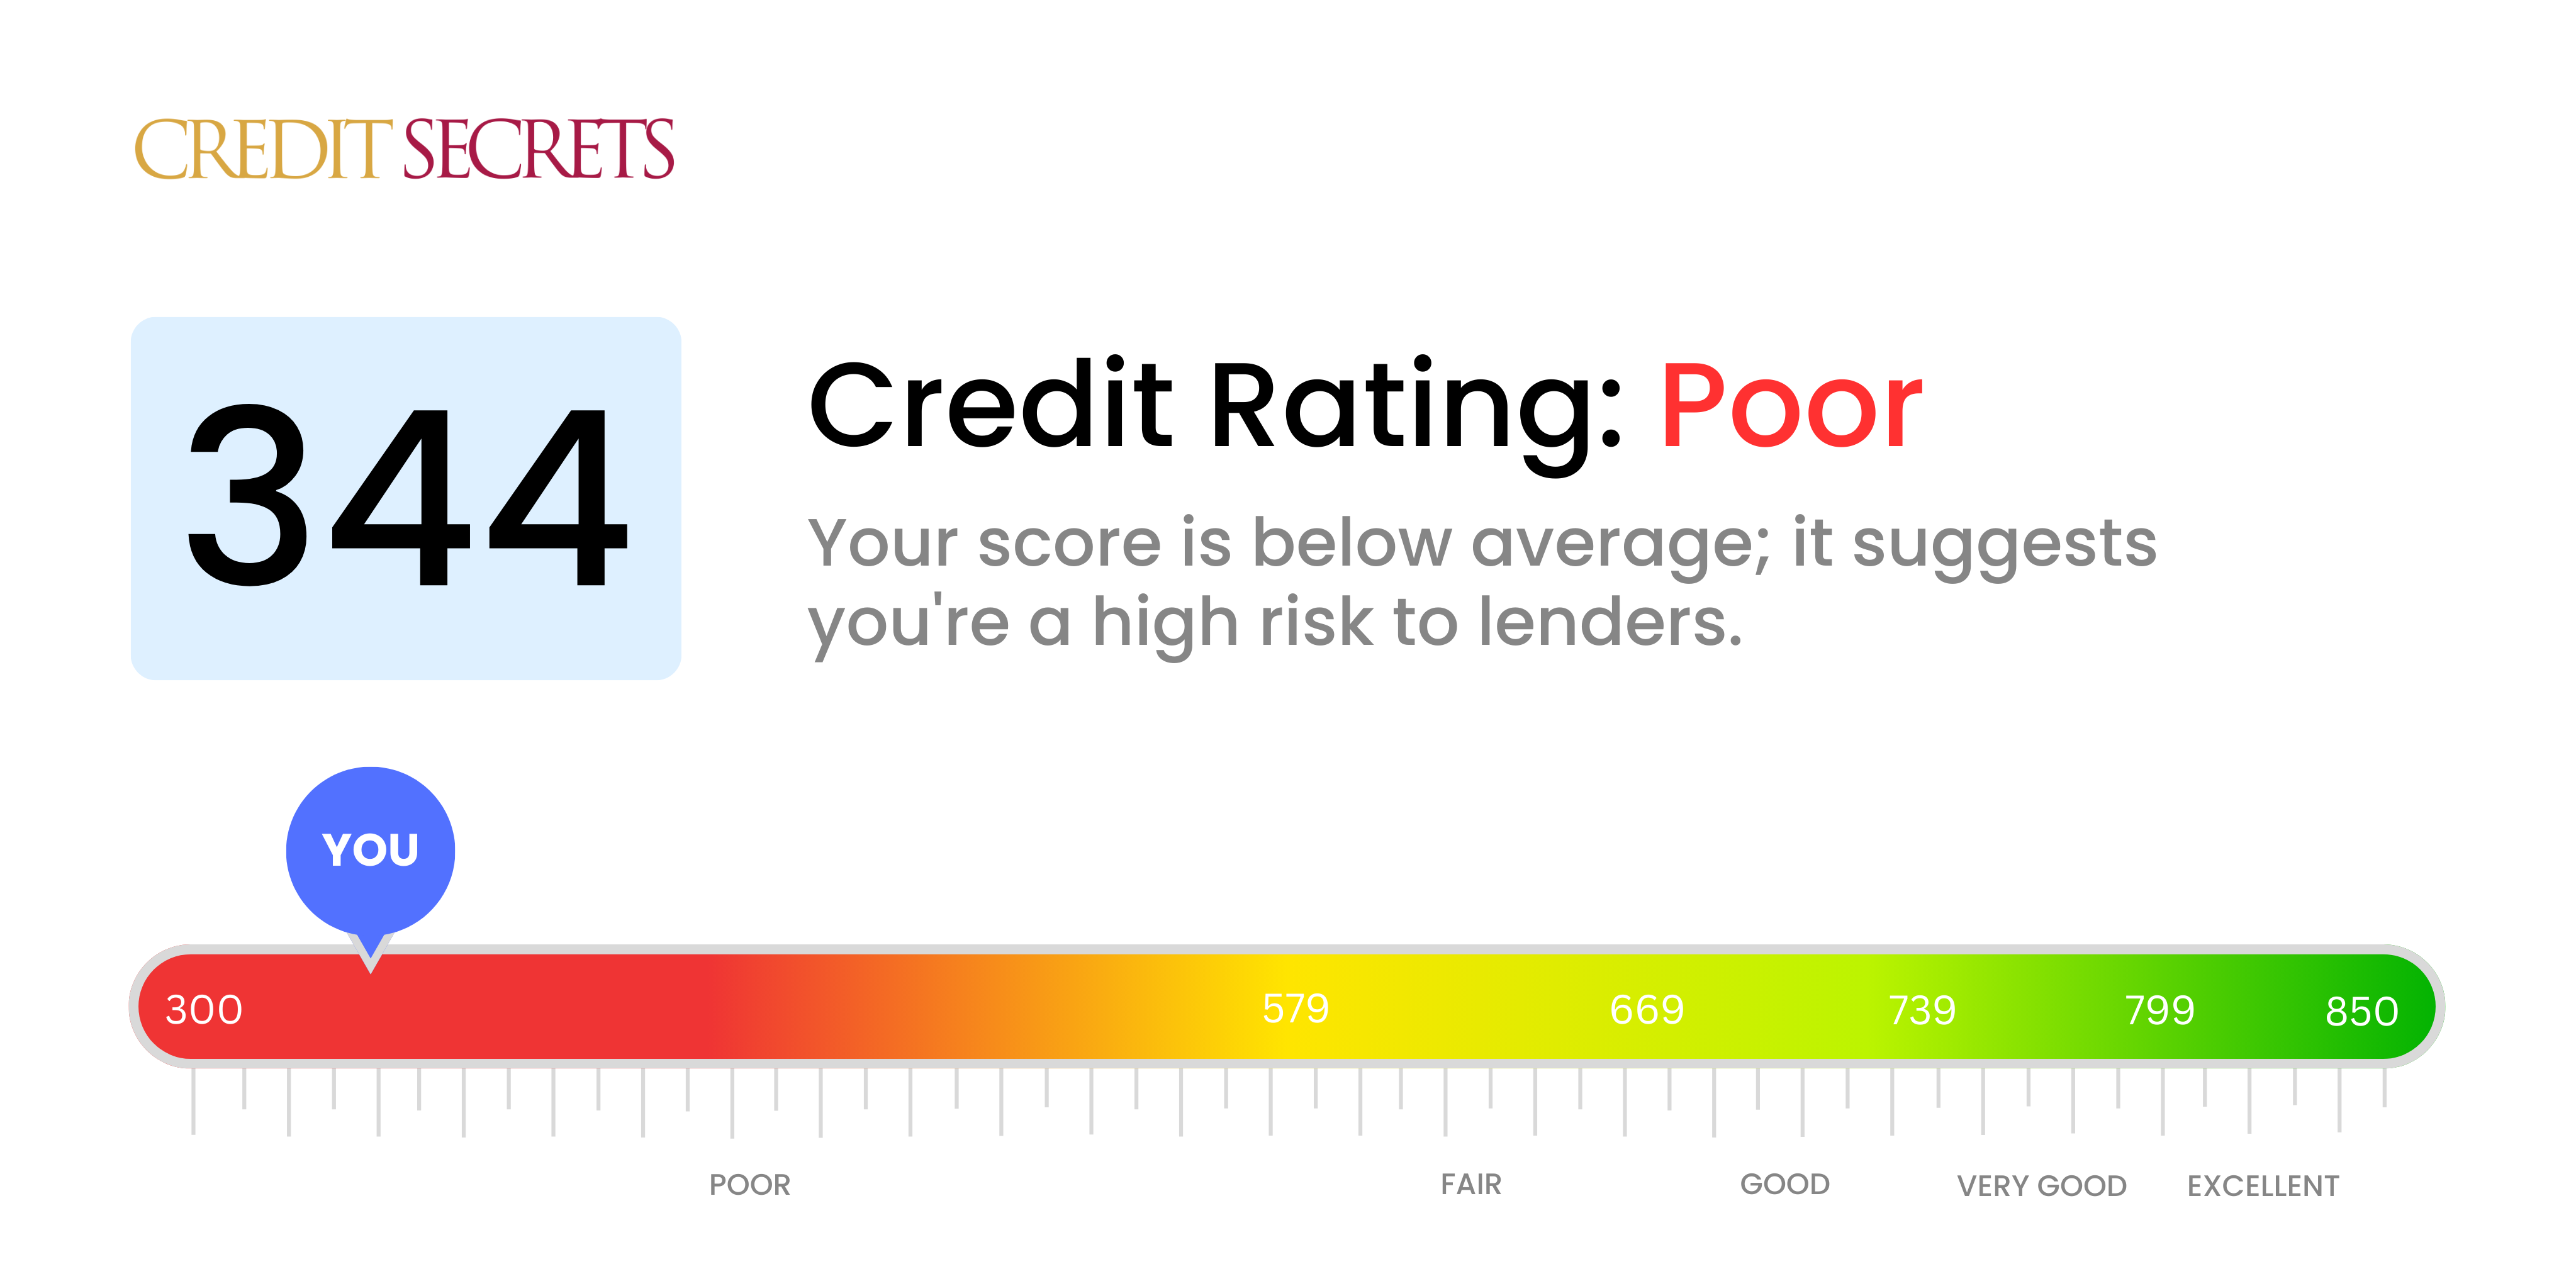 Is 344 a good credit score?